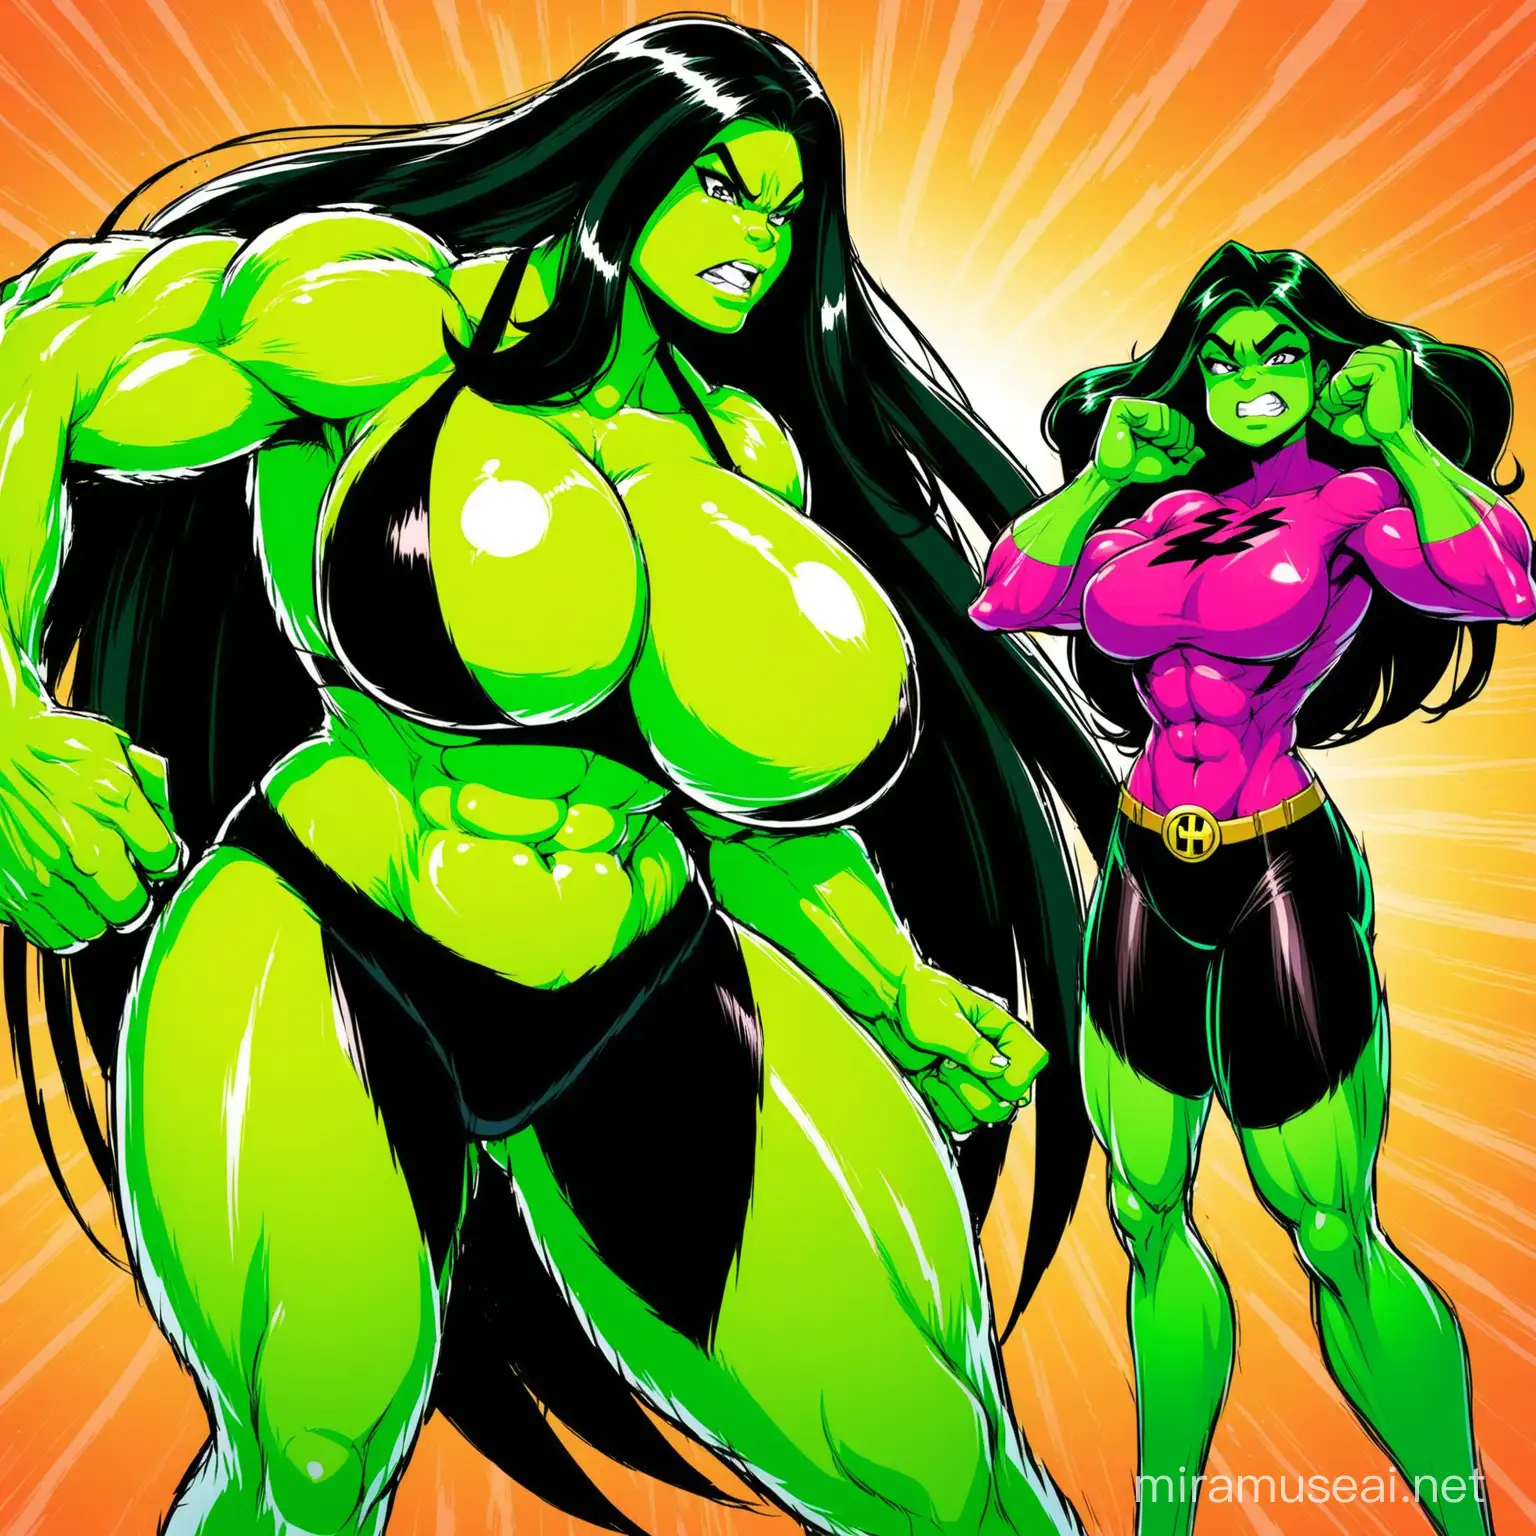 Shego giant she hulk transformation, giant breast and muscle growth vs kim possible giant red she hulk transformation, giant breast and muscle growth